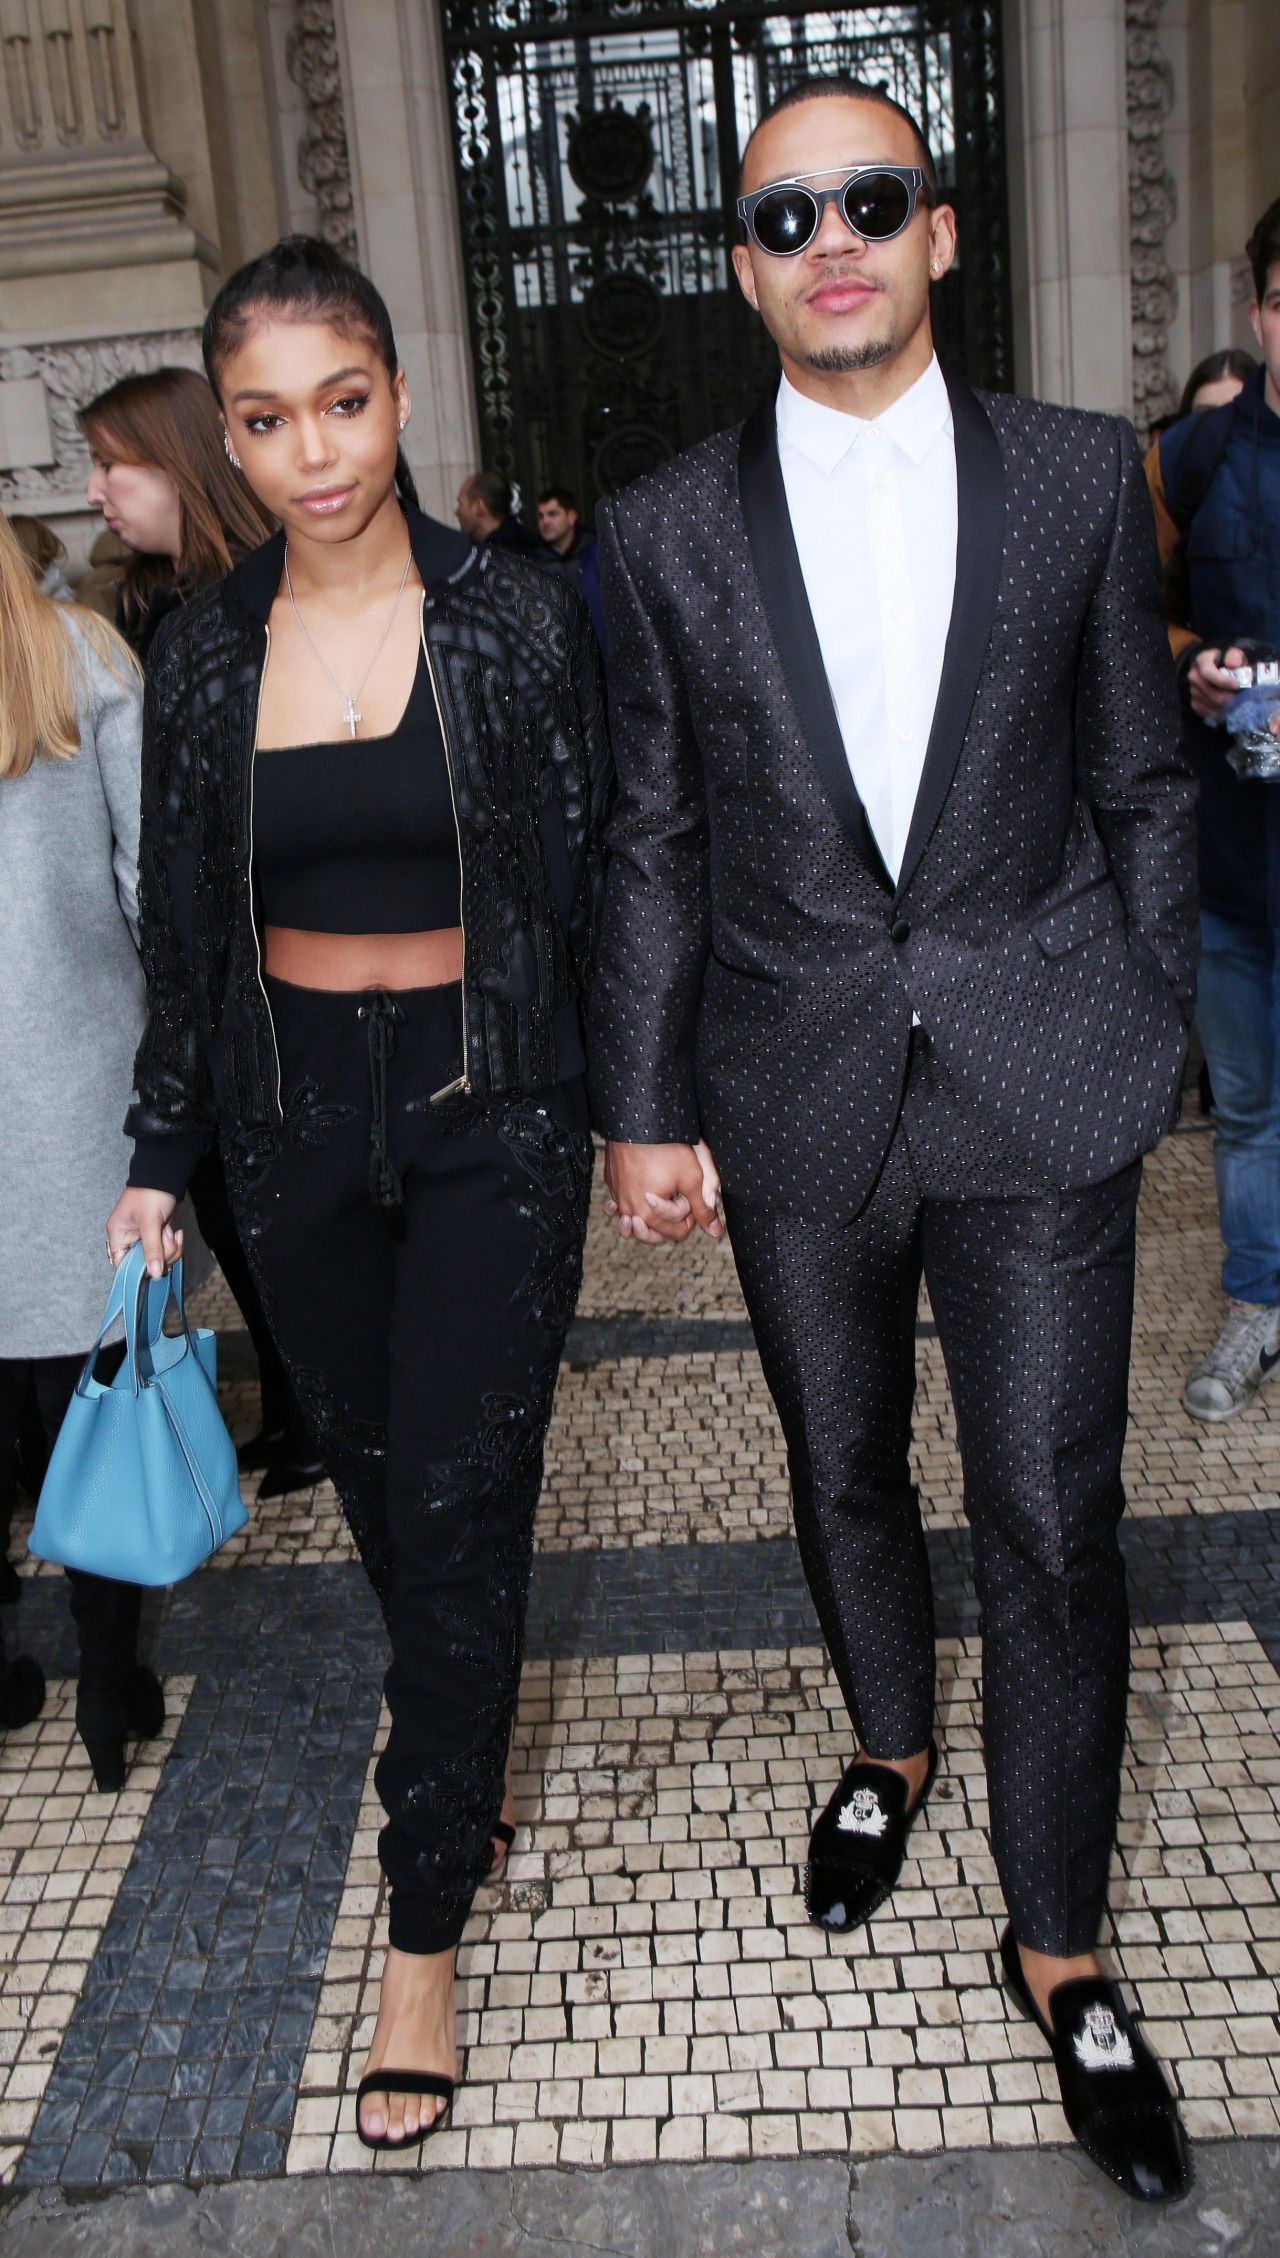 Lori Harvey & Memphis Depay leaving the Elie Saab show during Paris Fashion  Week Ready to wear Fall/Winter 2017-2018 on March 4, 2017 in Paris, France.  (Photo by Lyvans Boolaky/imageSPACE) *** Please